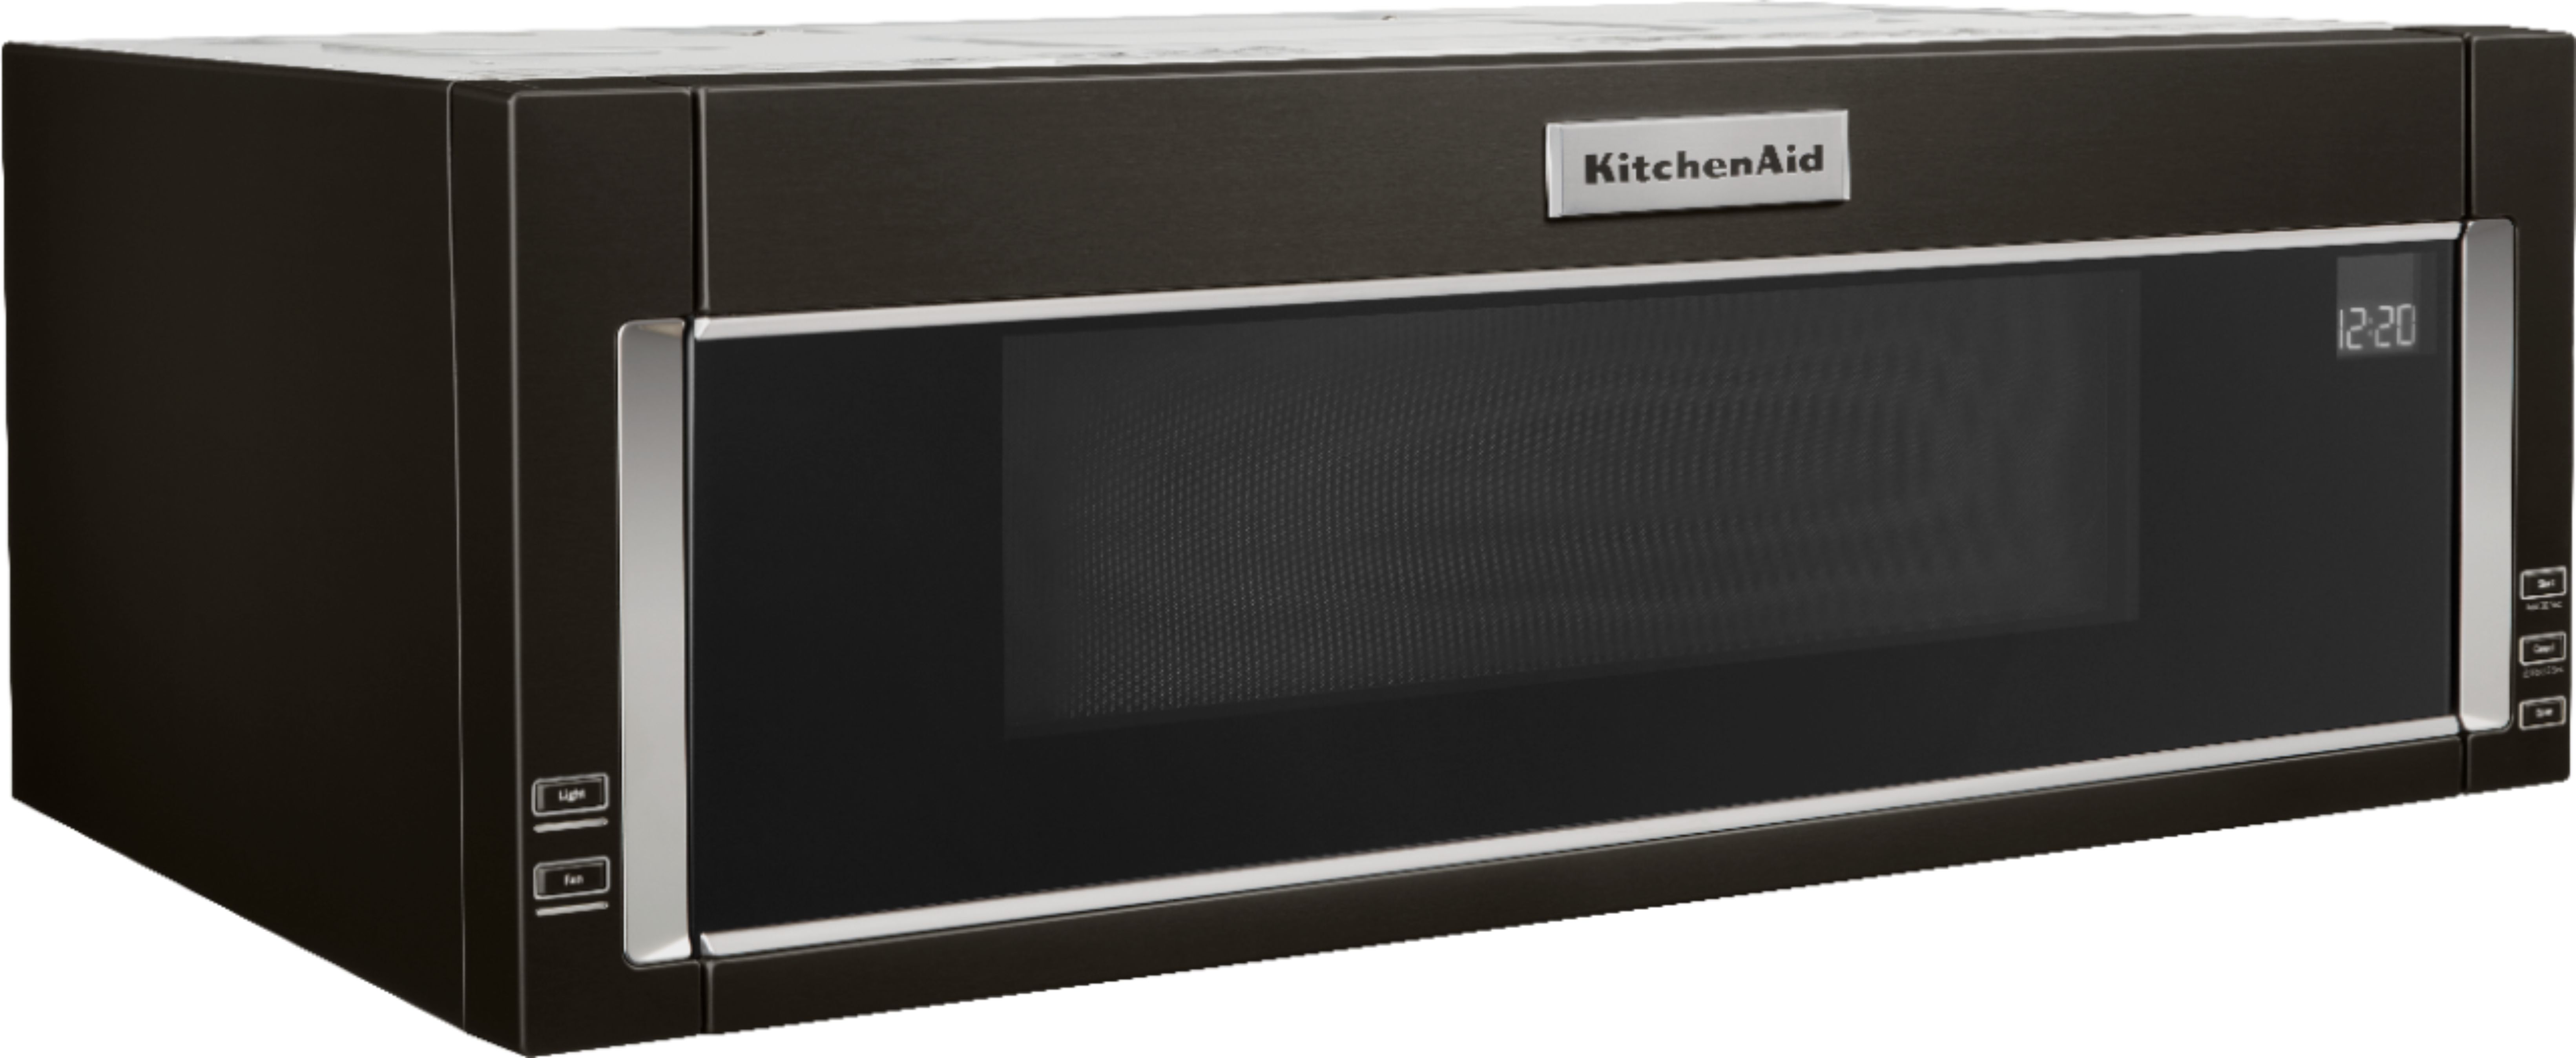 KitchenAid - 1.1 Cu. Ft. Over-the-Range Microwave with Sensor Cooking Kitchenaid Over The Range Microwave Black Stainless Steel